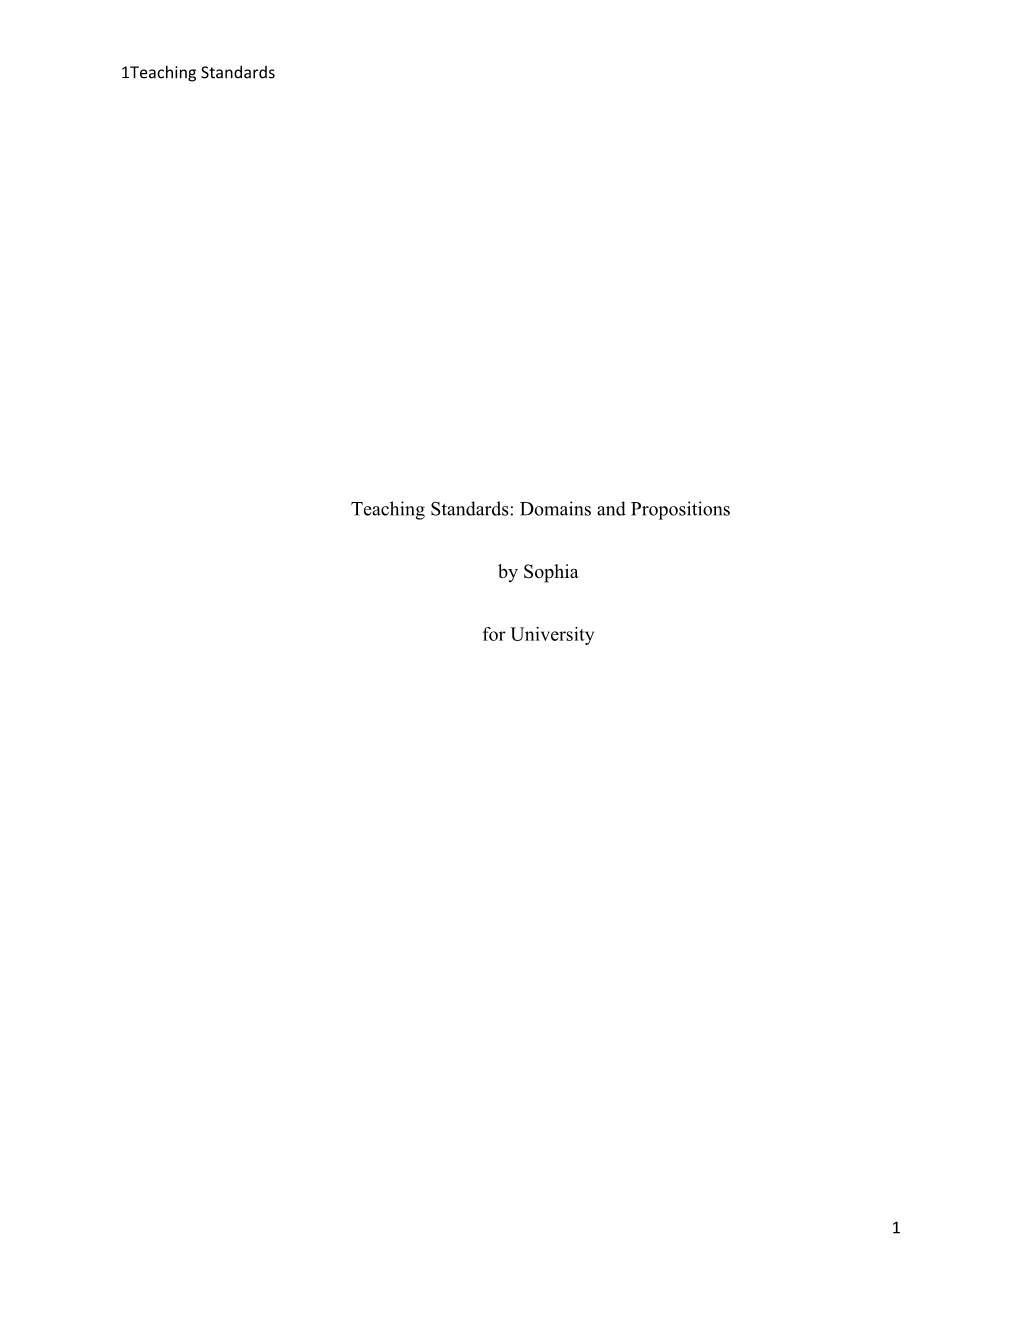 Teaching Standards: Domains and Propositions